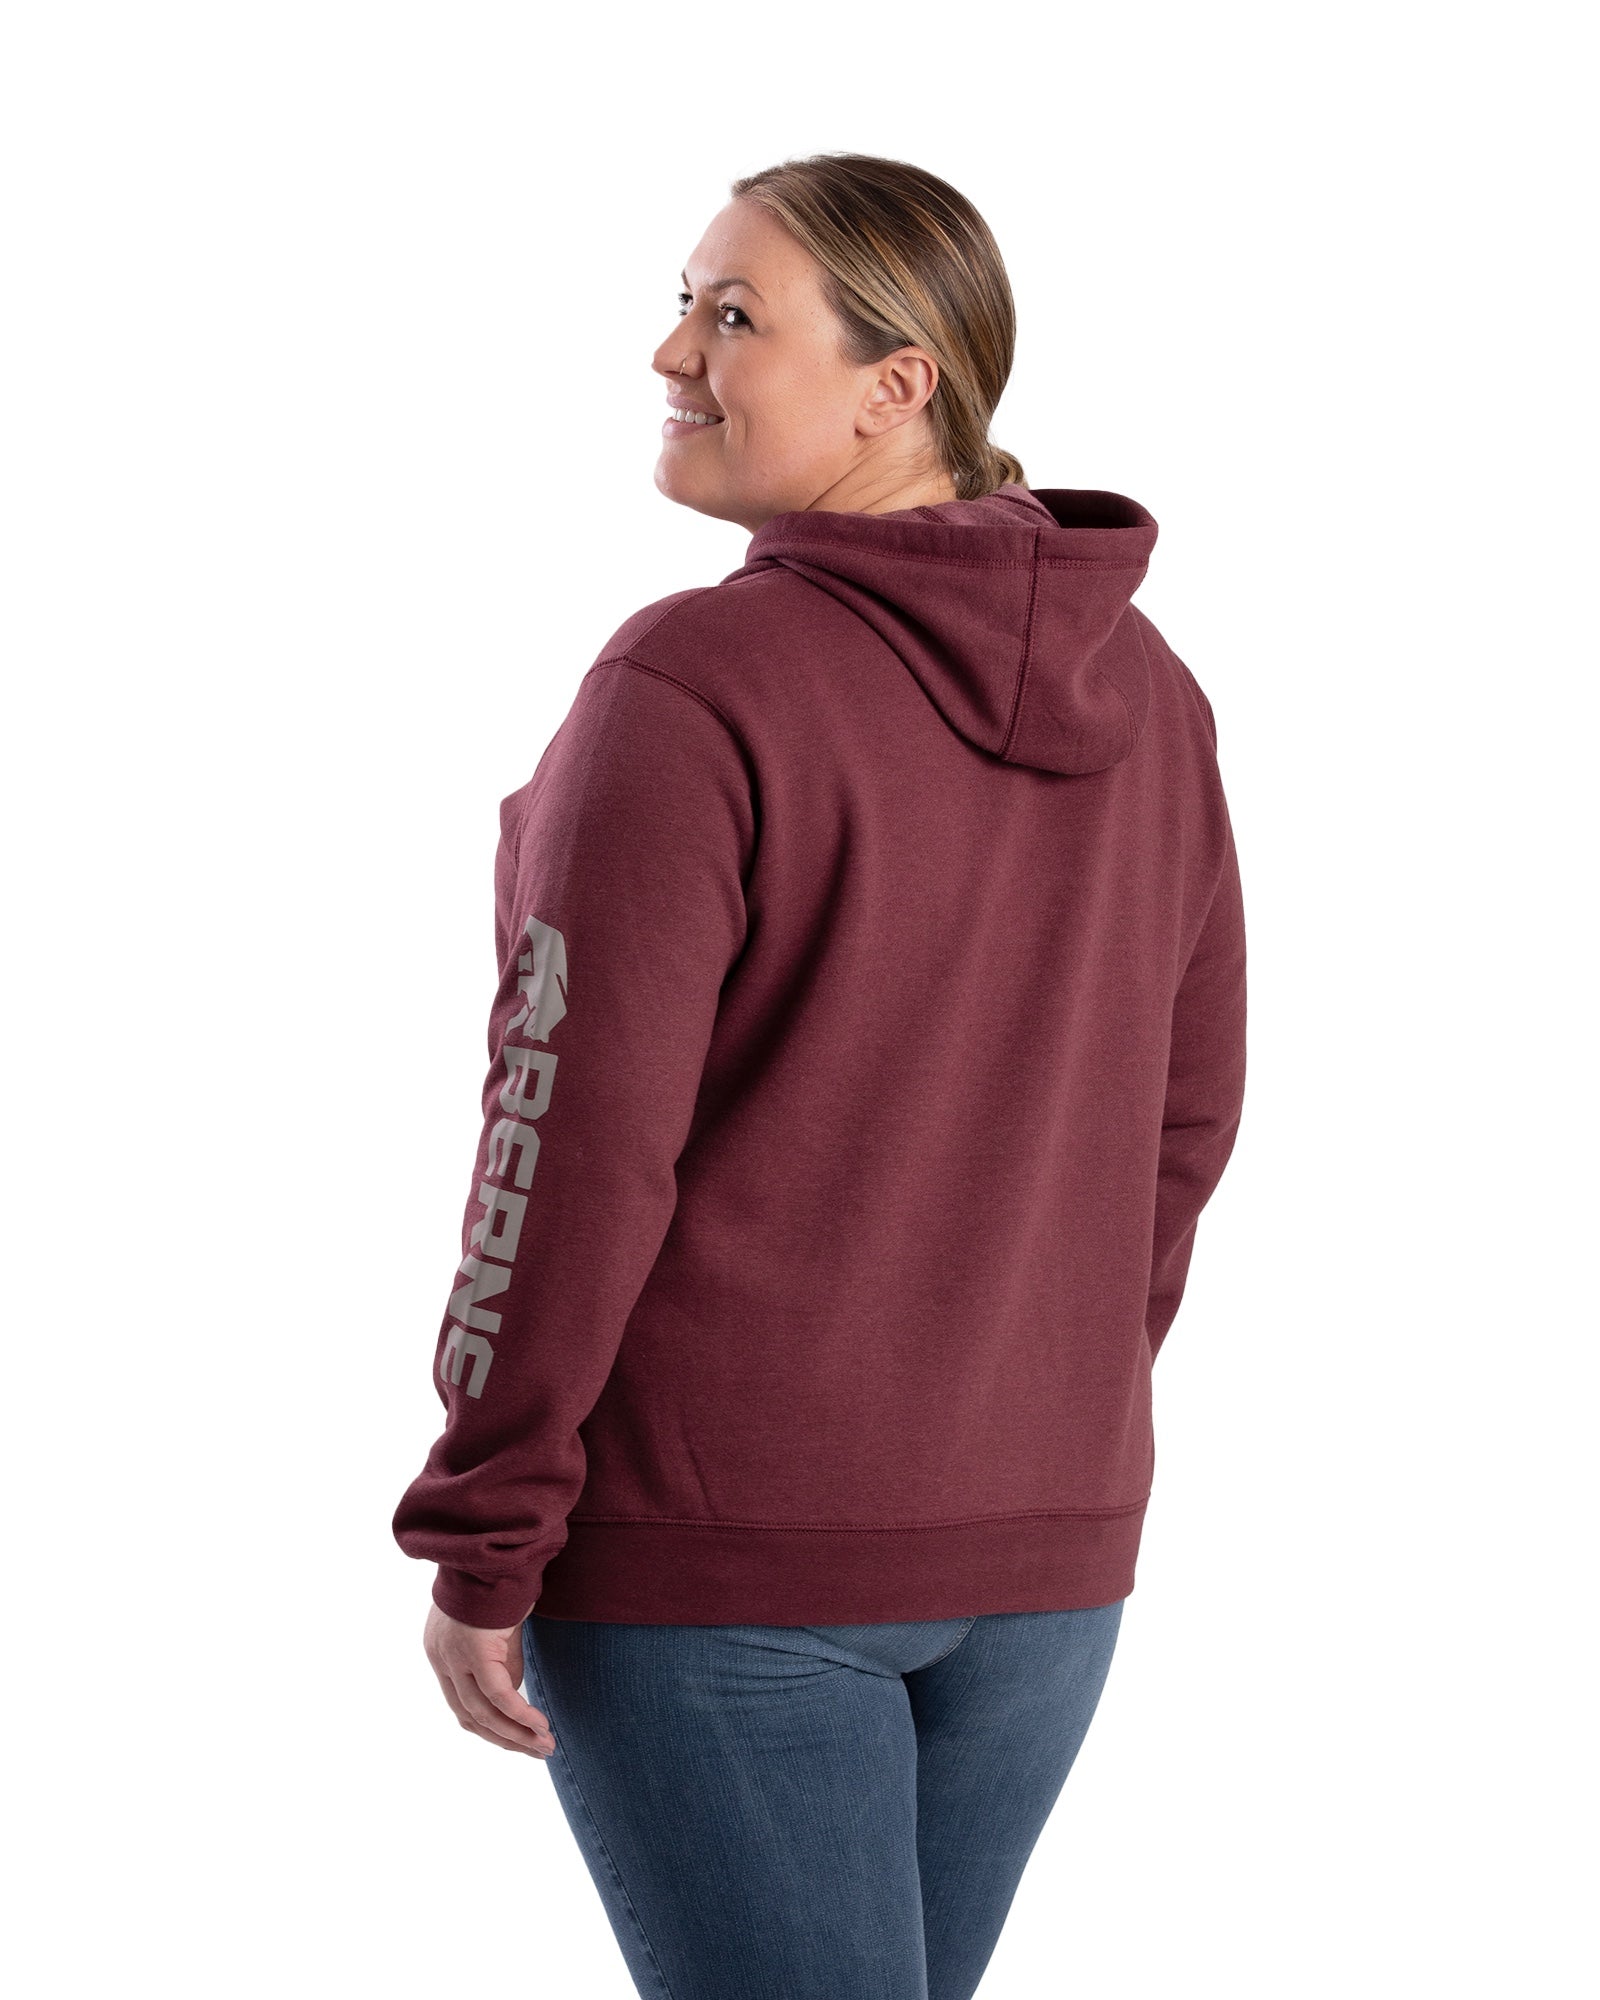 WSP401CAB Women's Signature Sleeve Hooded Pullover